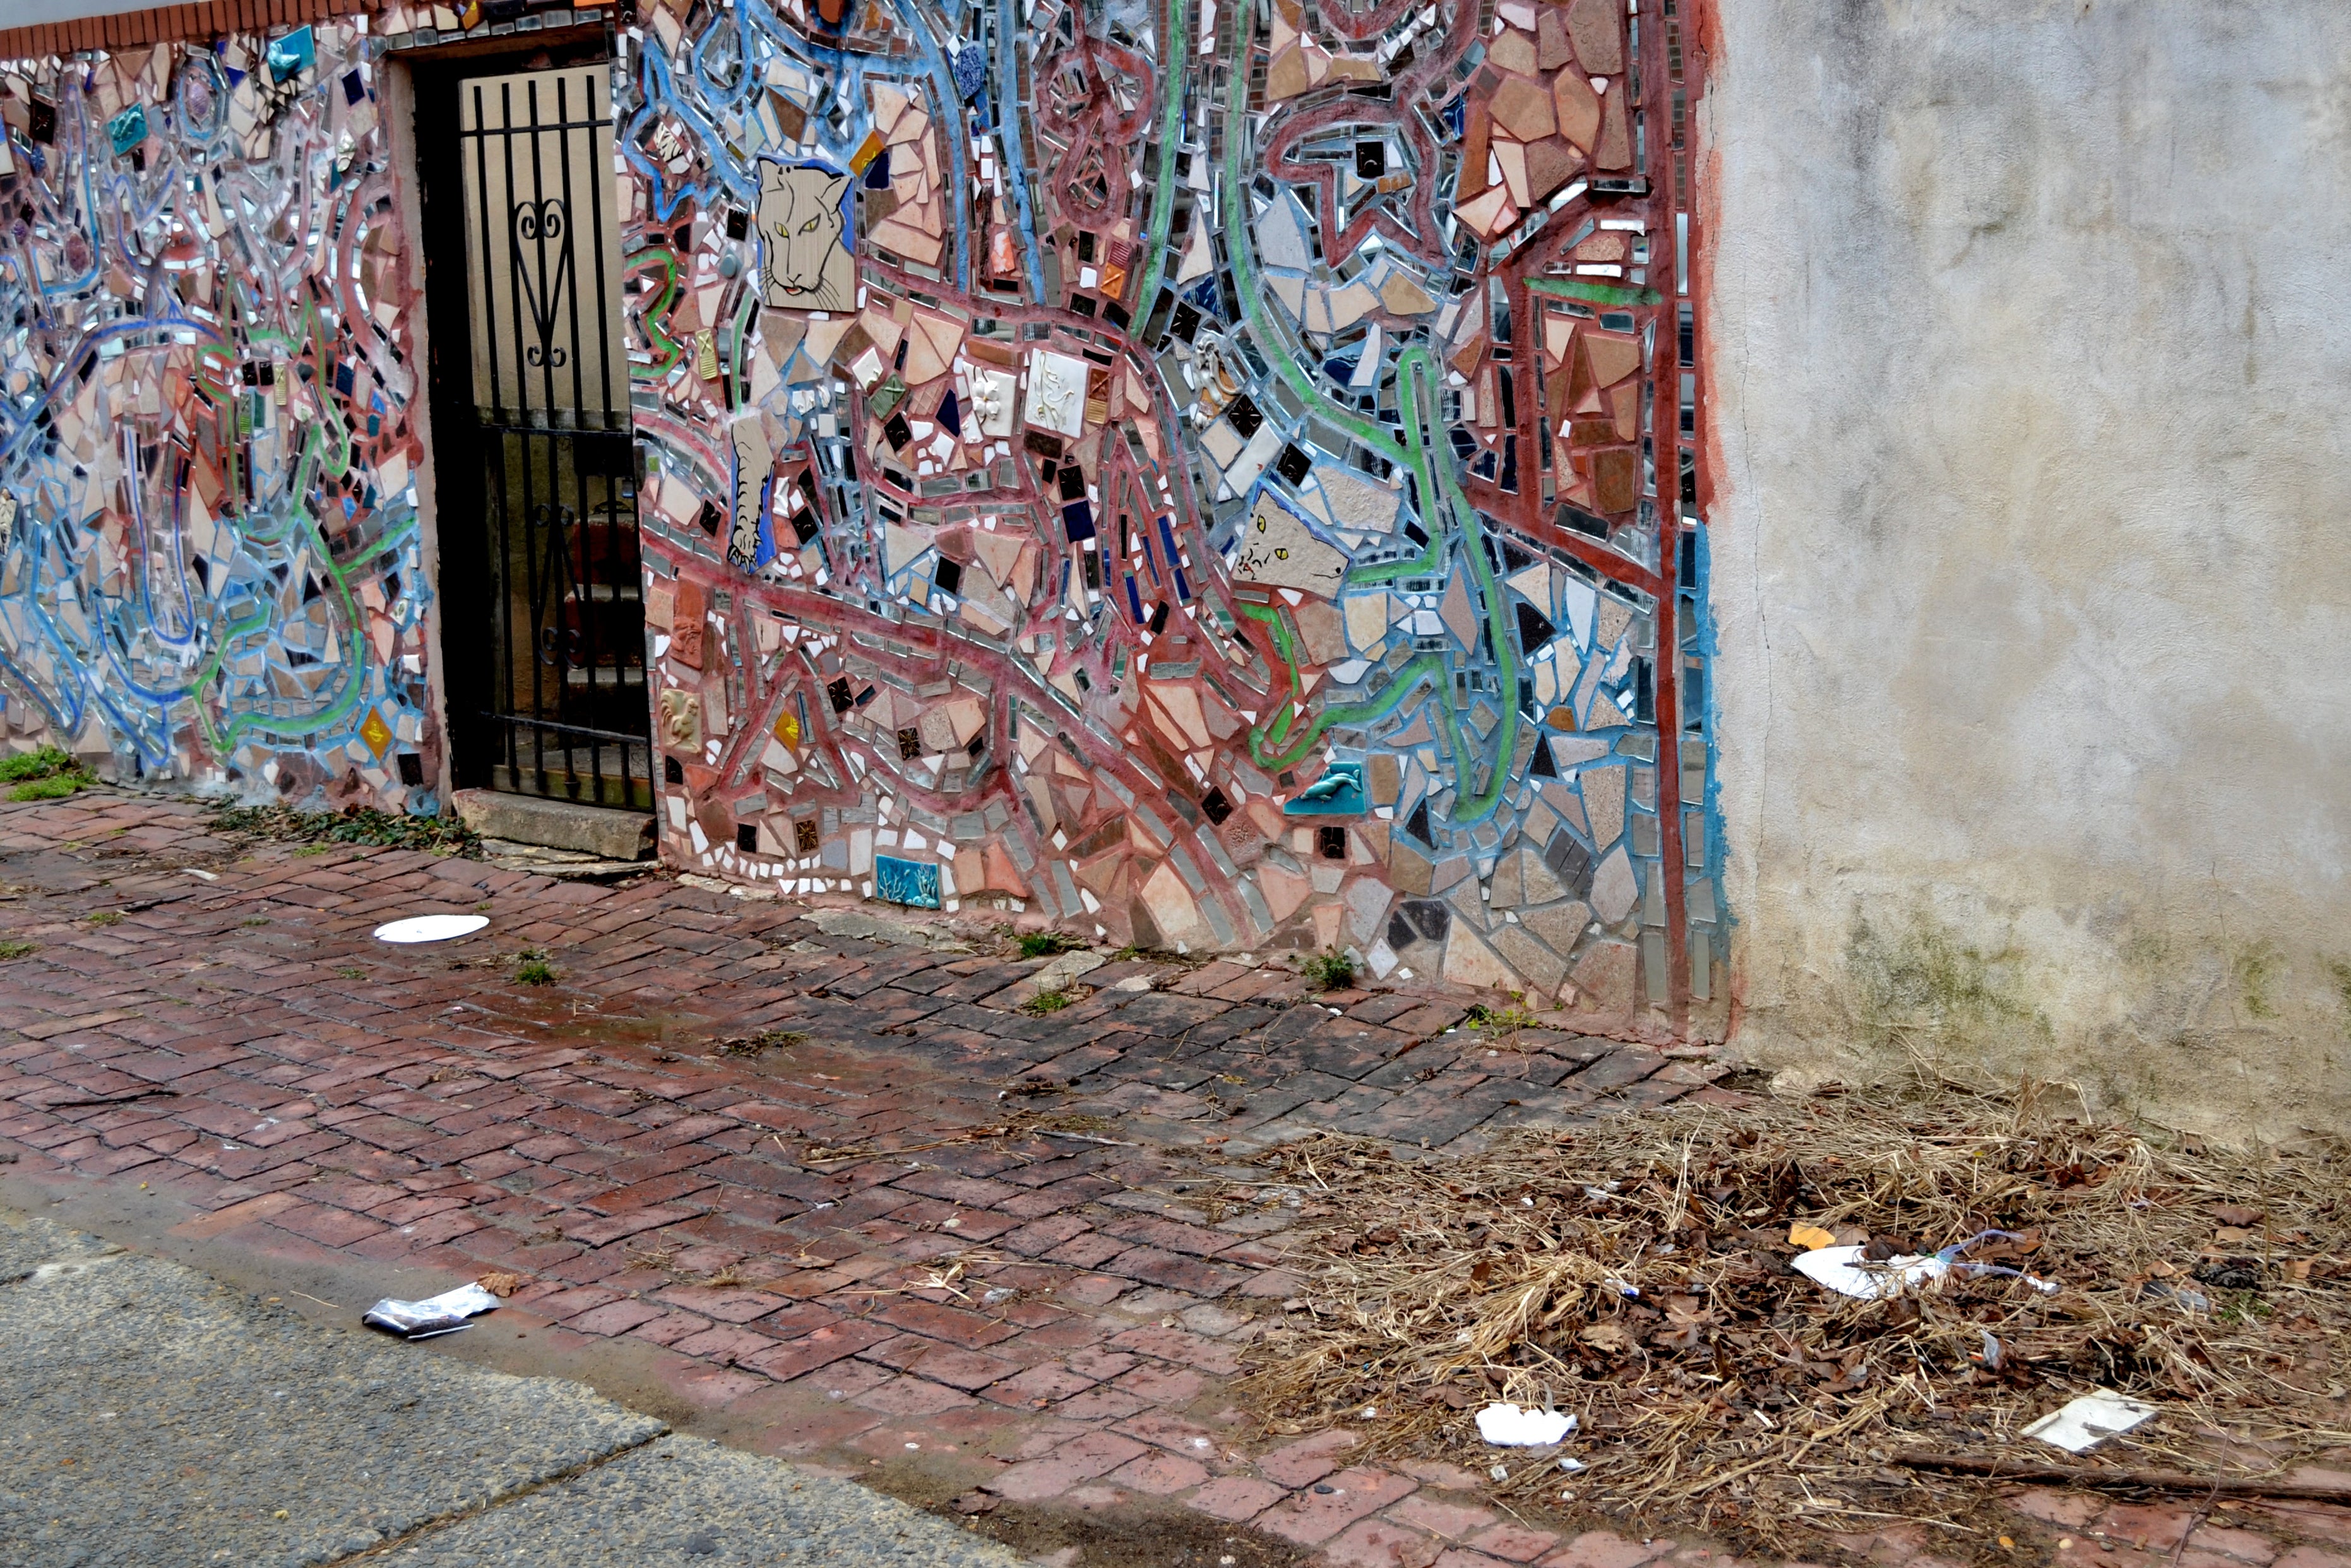 Trash litters the street in front of a South Philly mosaic